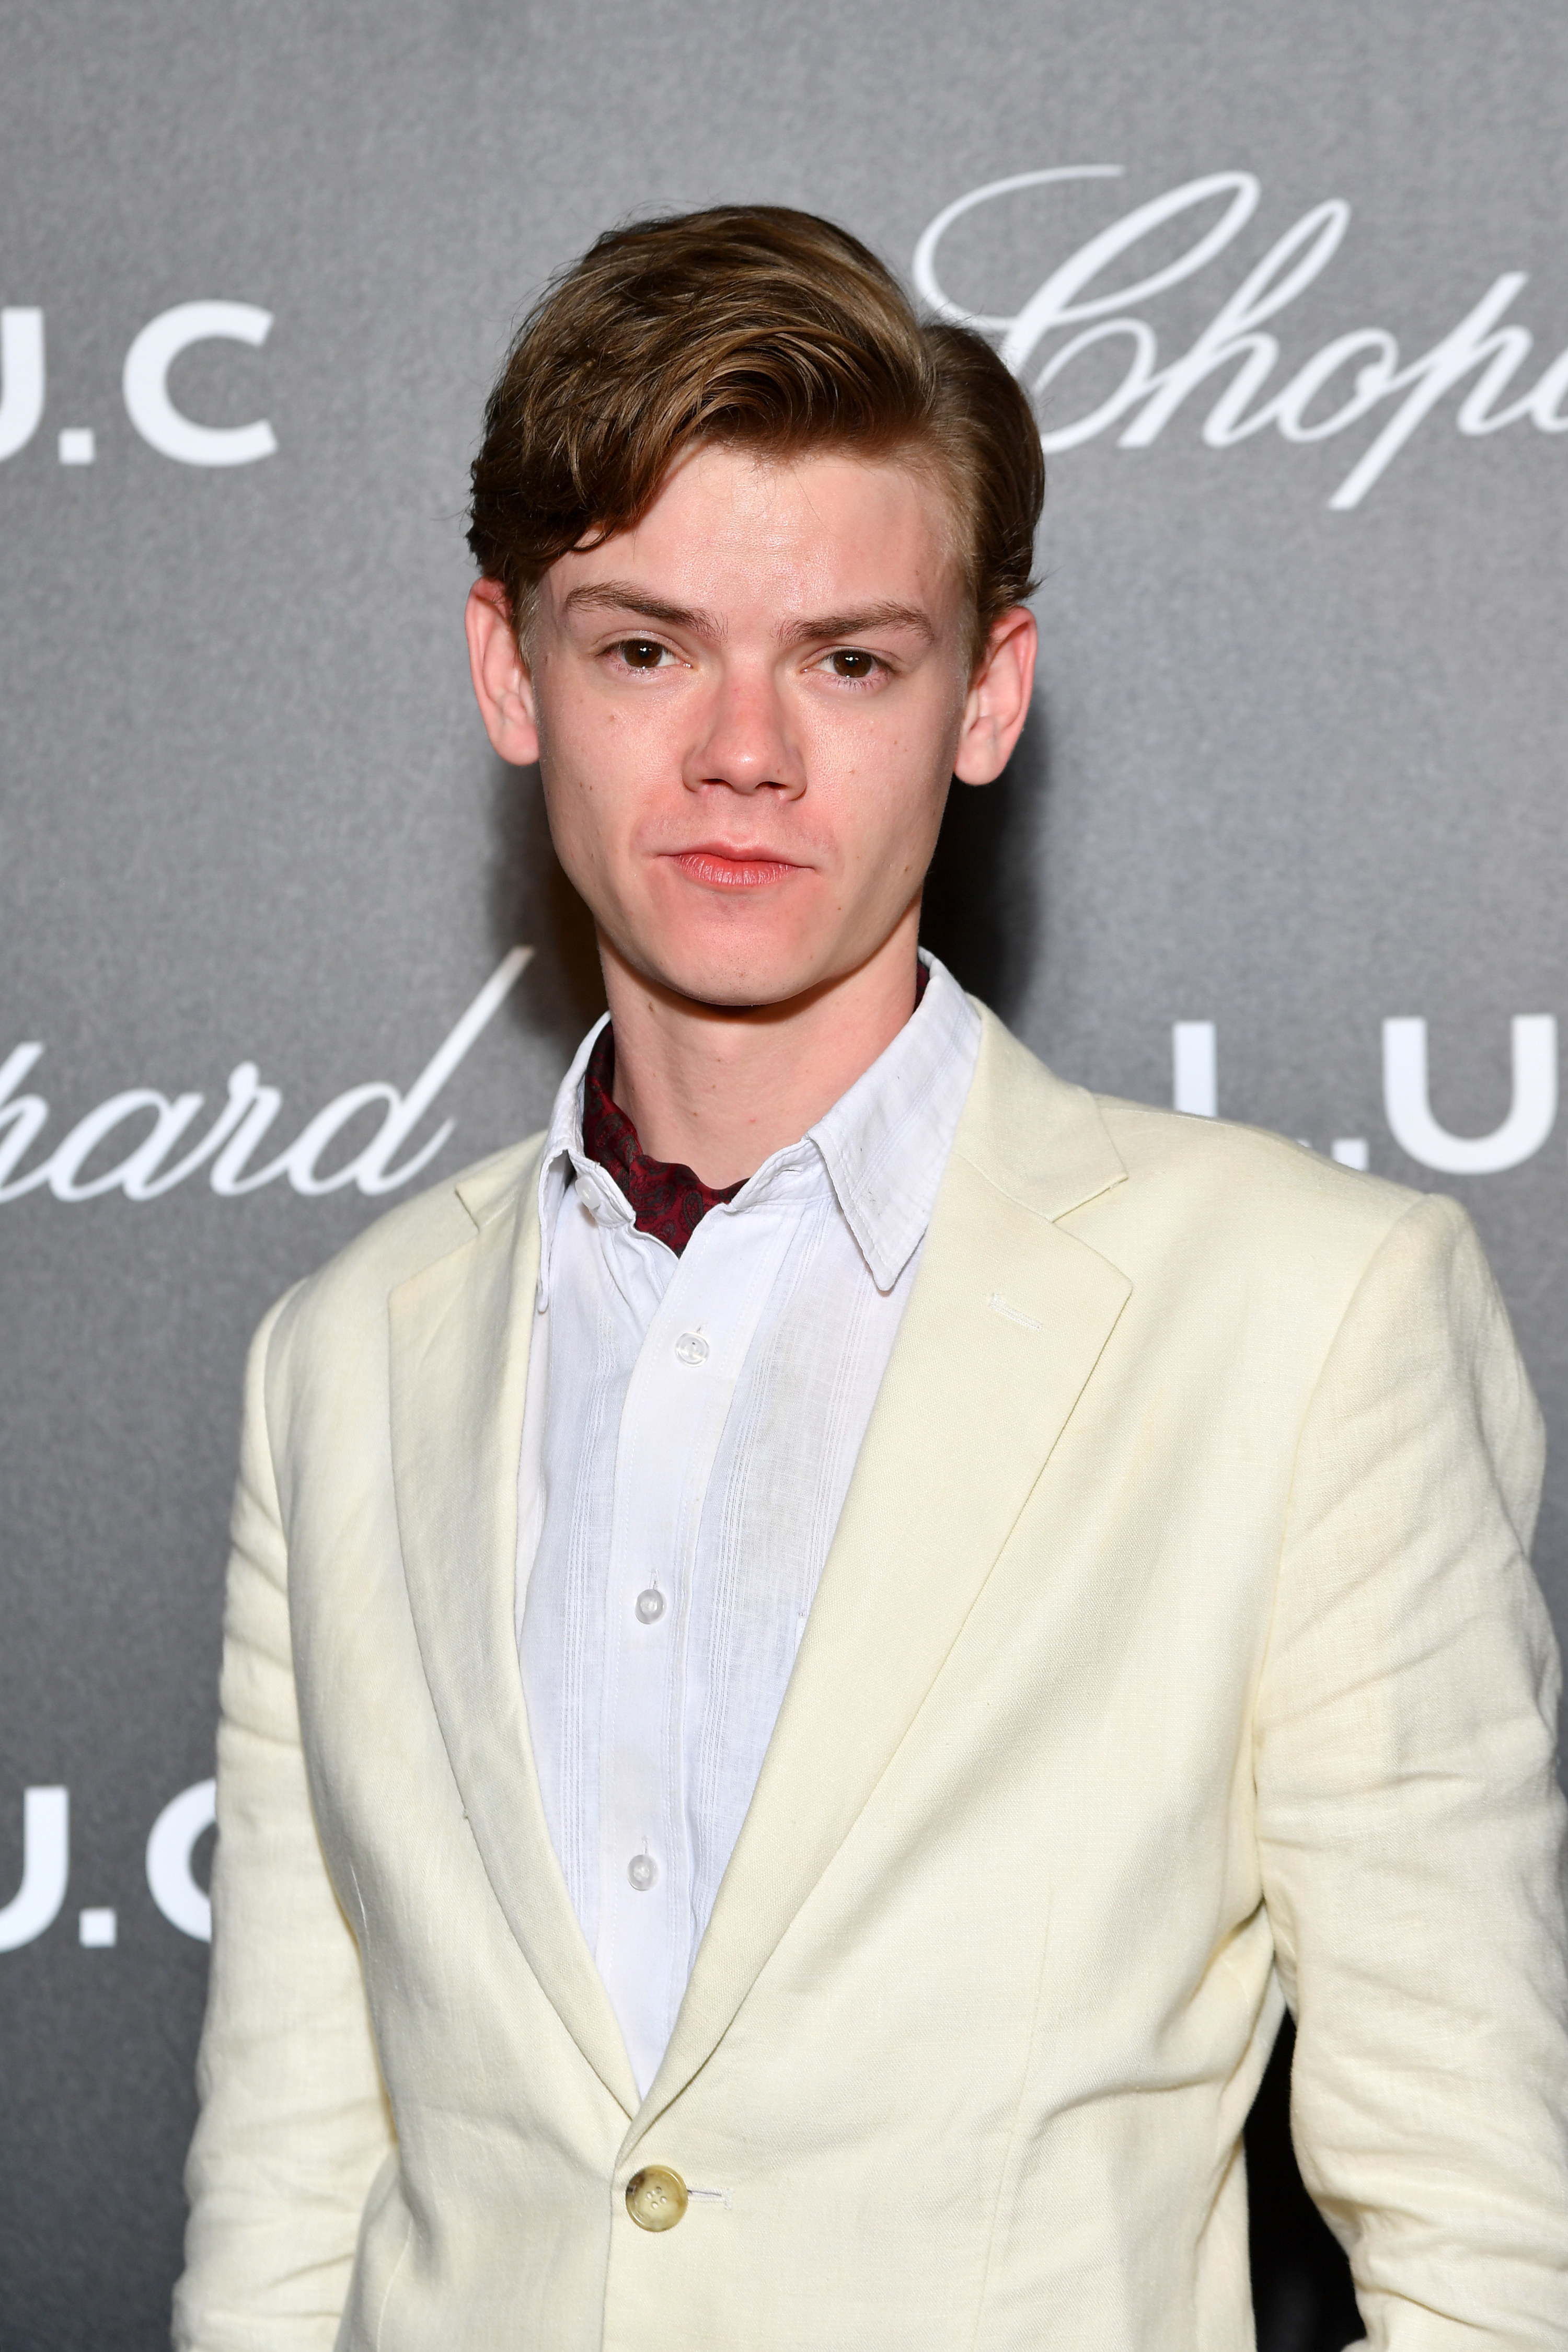 Thomas in a casual shirt and jacket on the red carpet